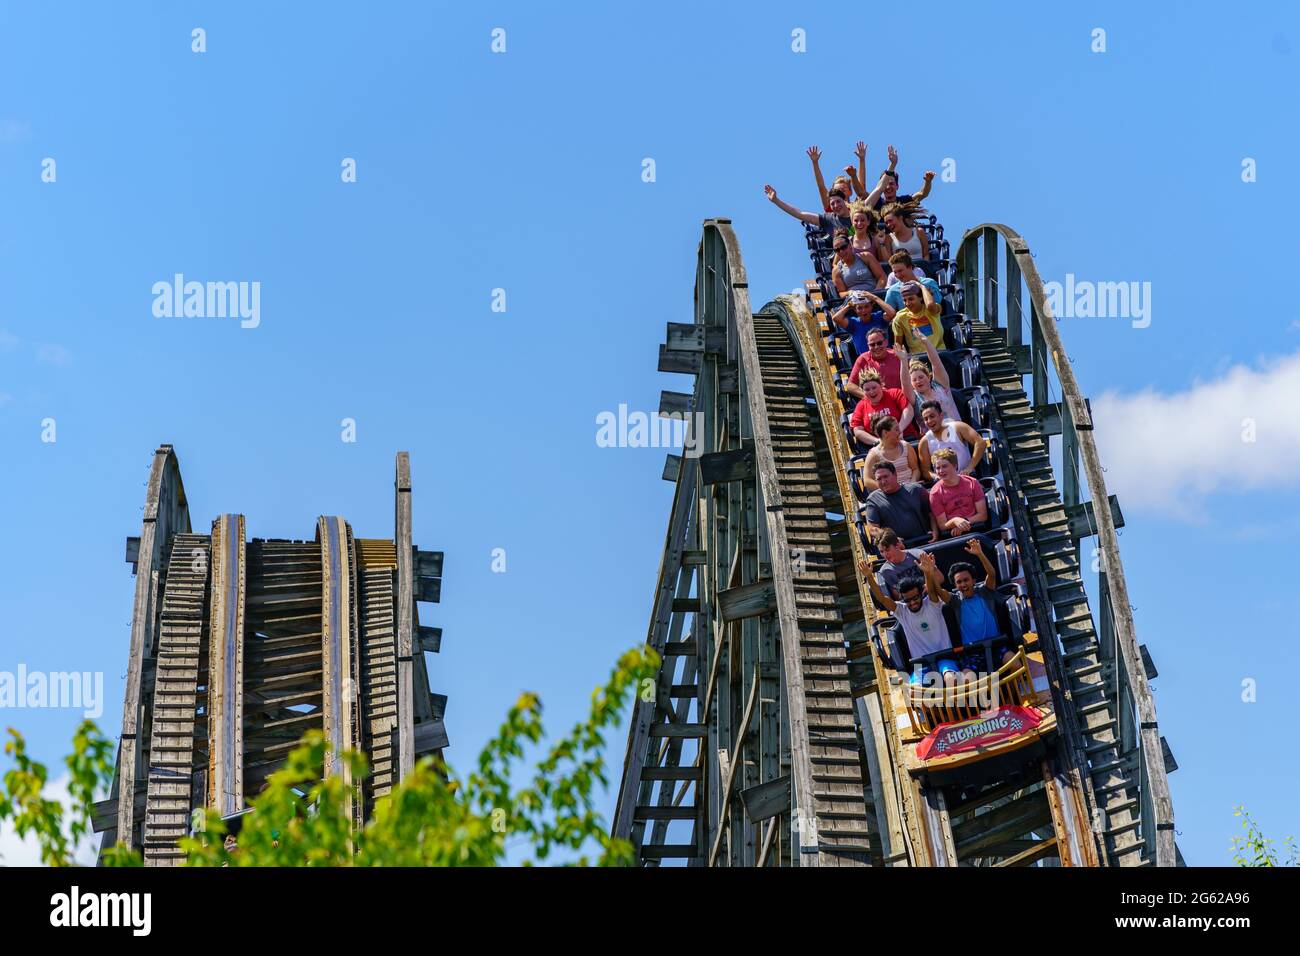 Hershey, PA, USA – June 27, 2021: Visitors at Hersheypark ride the first racing and dueling double-track wooden roller coaster in the United States. Stock Photo